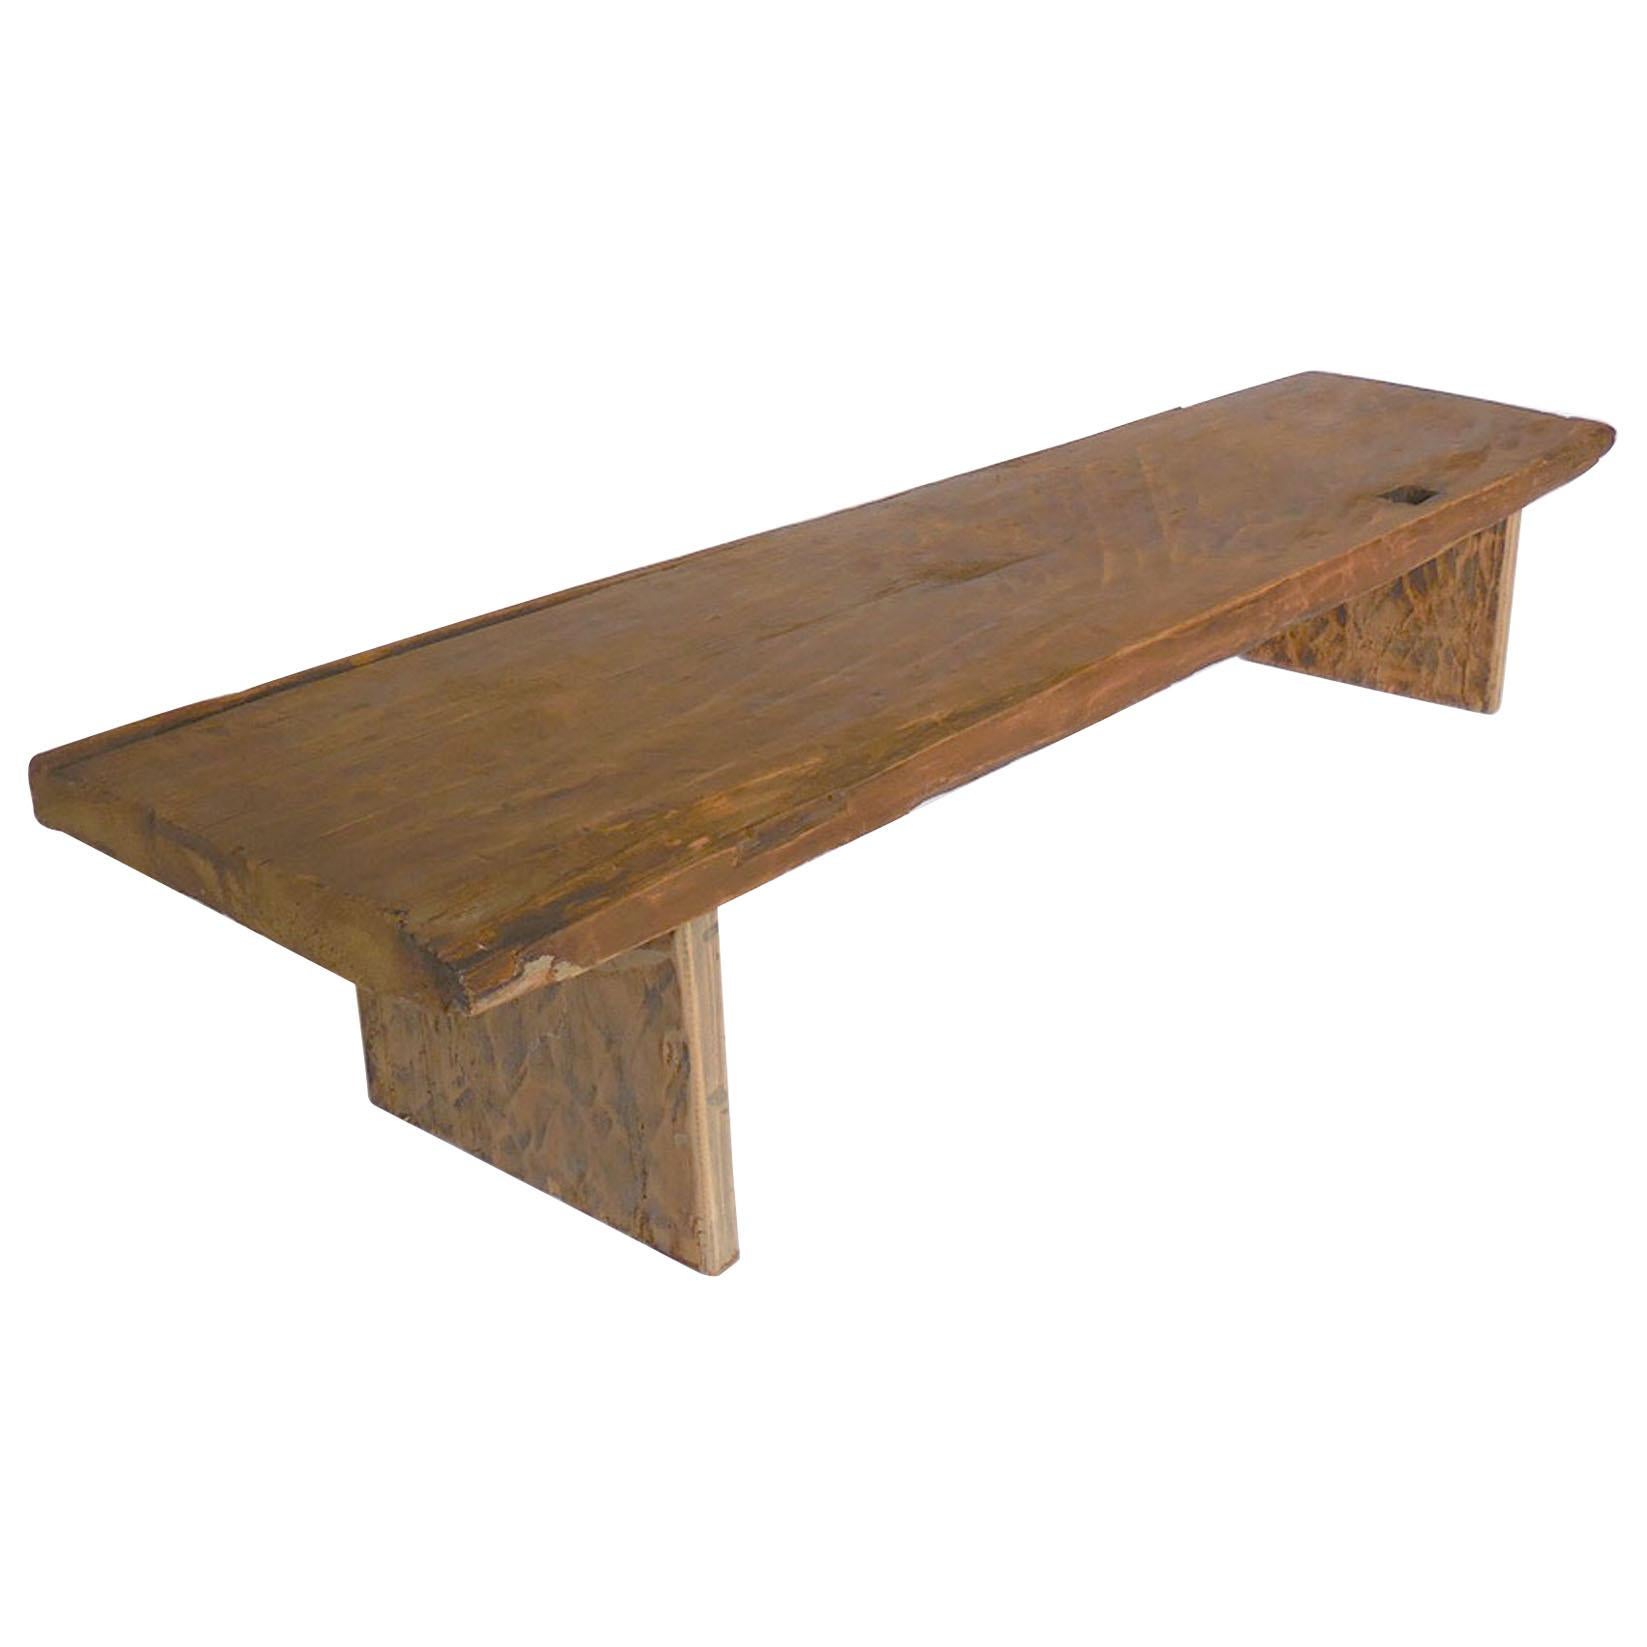 Antique Rustic Wooden Bench or Coffee Table